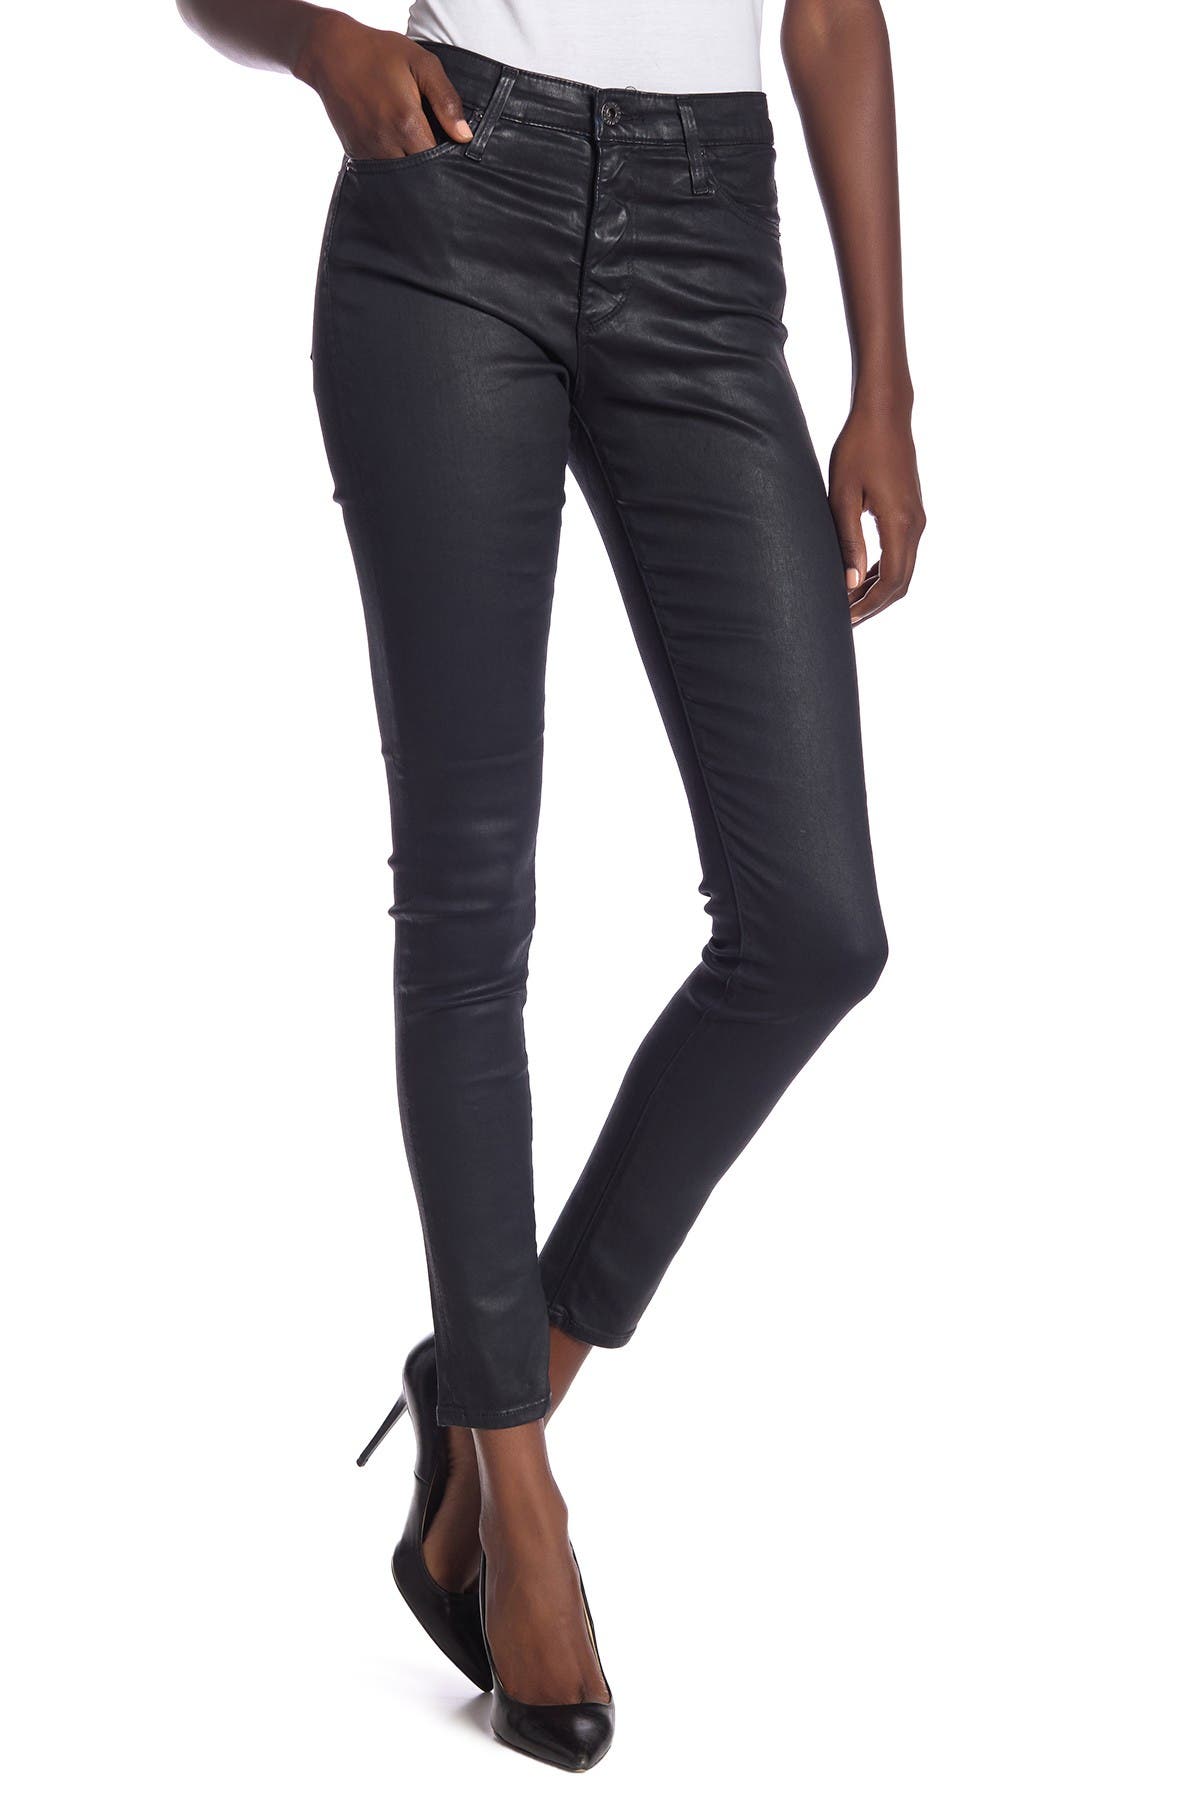 ag faux leather jeans